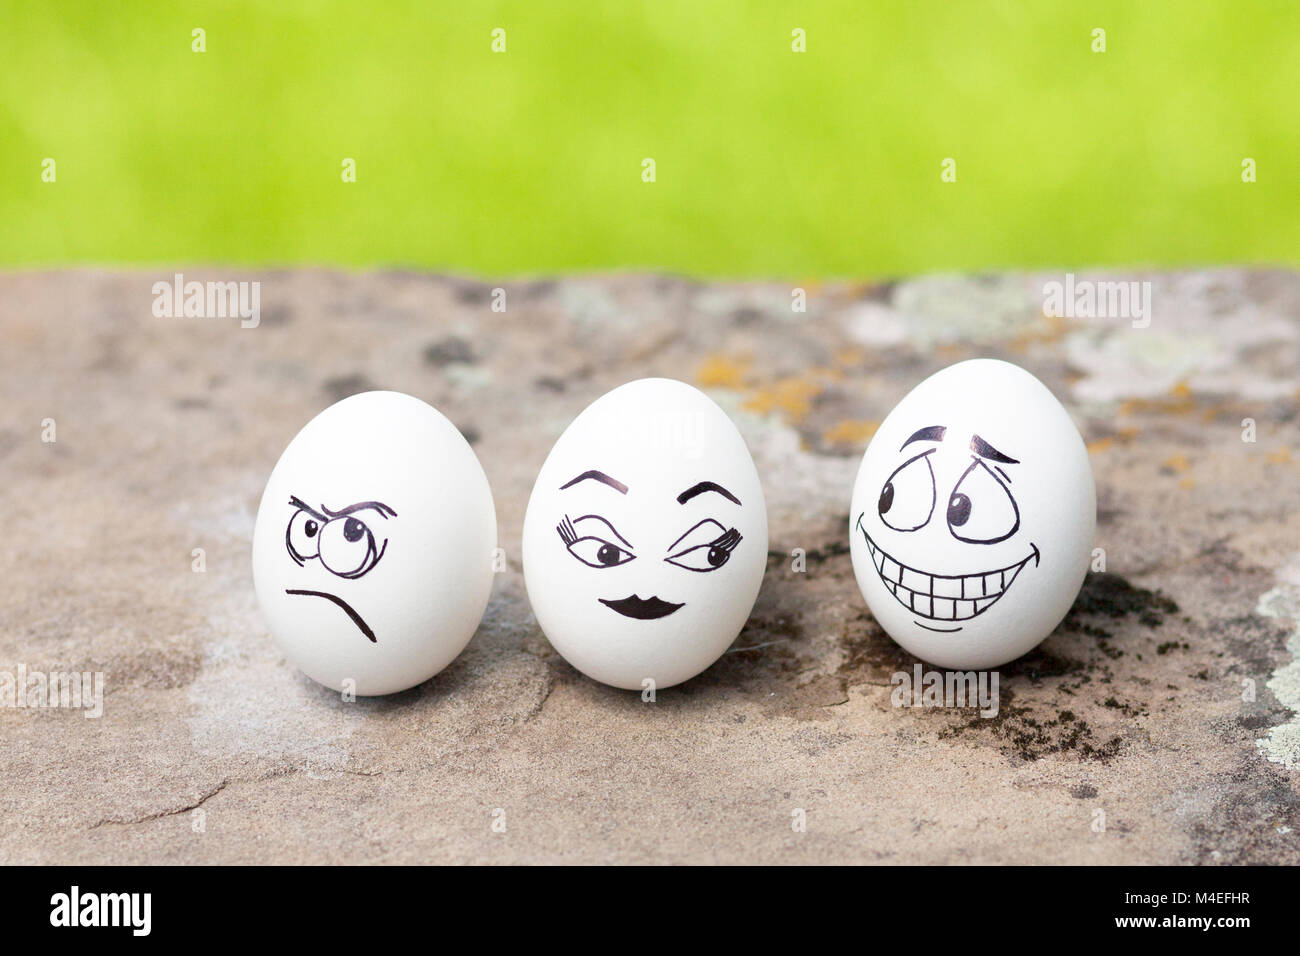 Mischievous, angry and flirty faces drawn on eggs Stock Photo